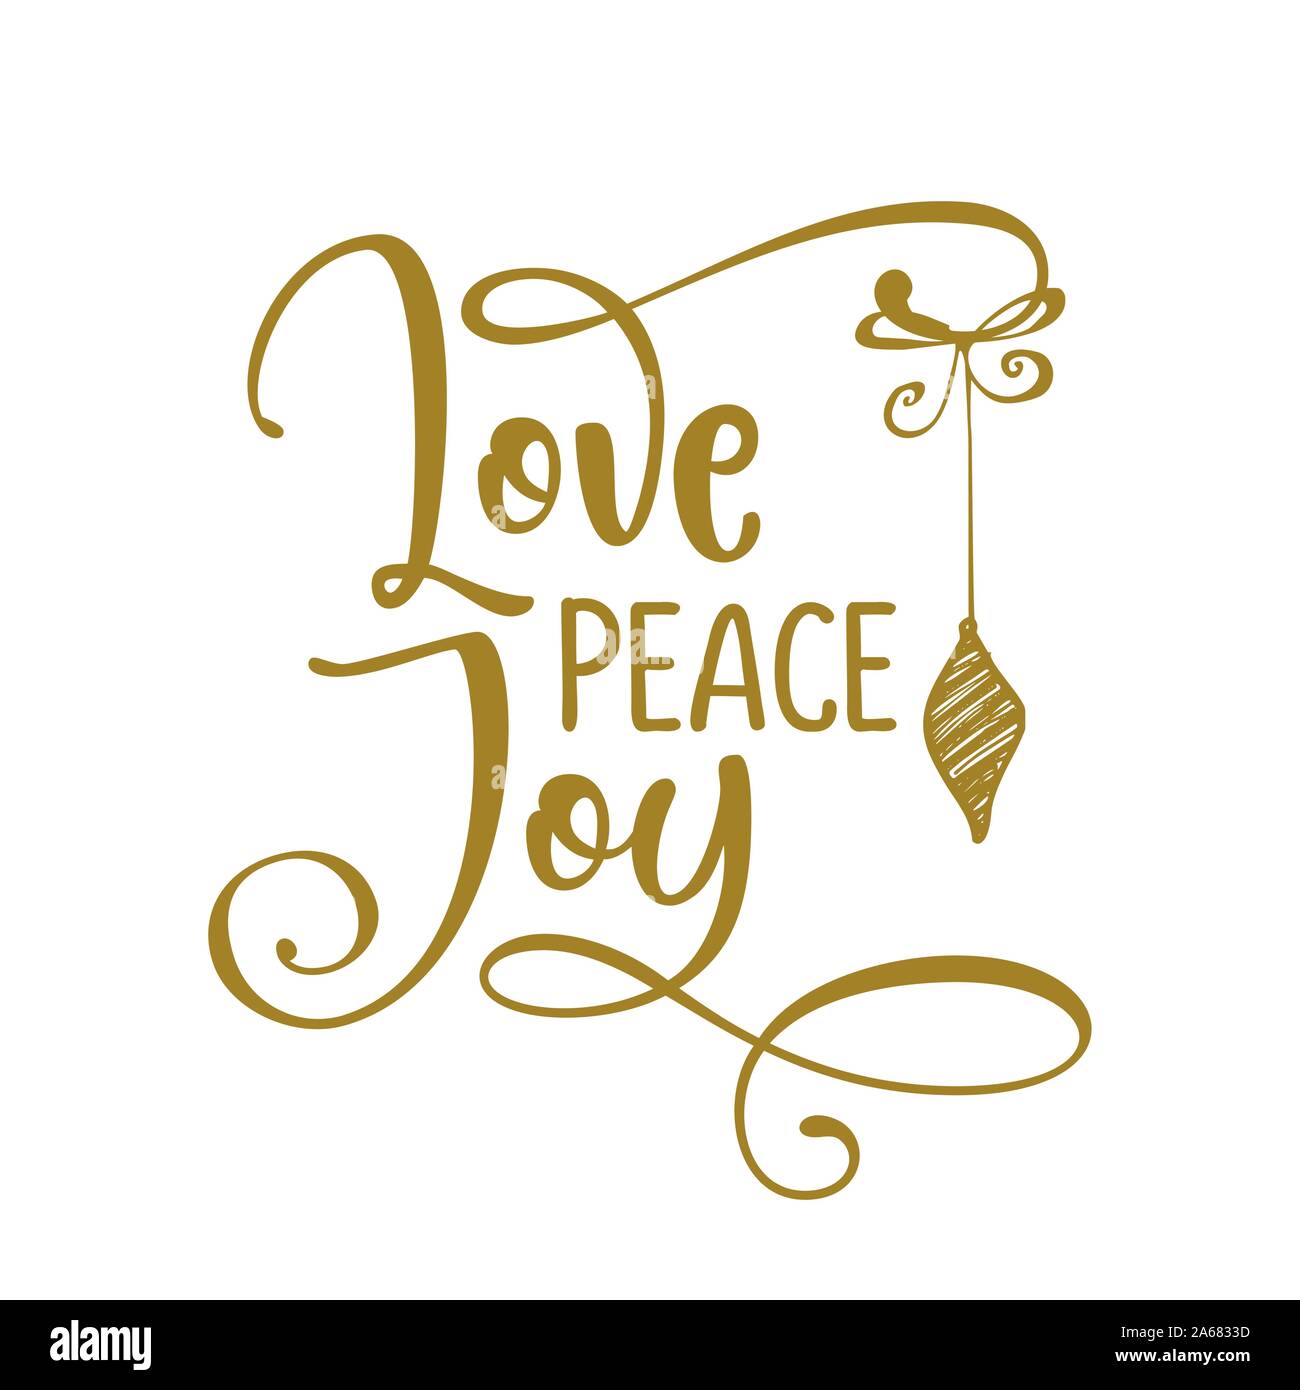 Love Peace Joy - Greeting card text - Calligraphy phrase for ...